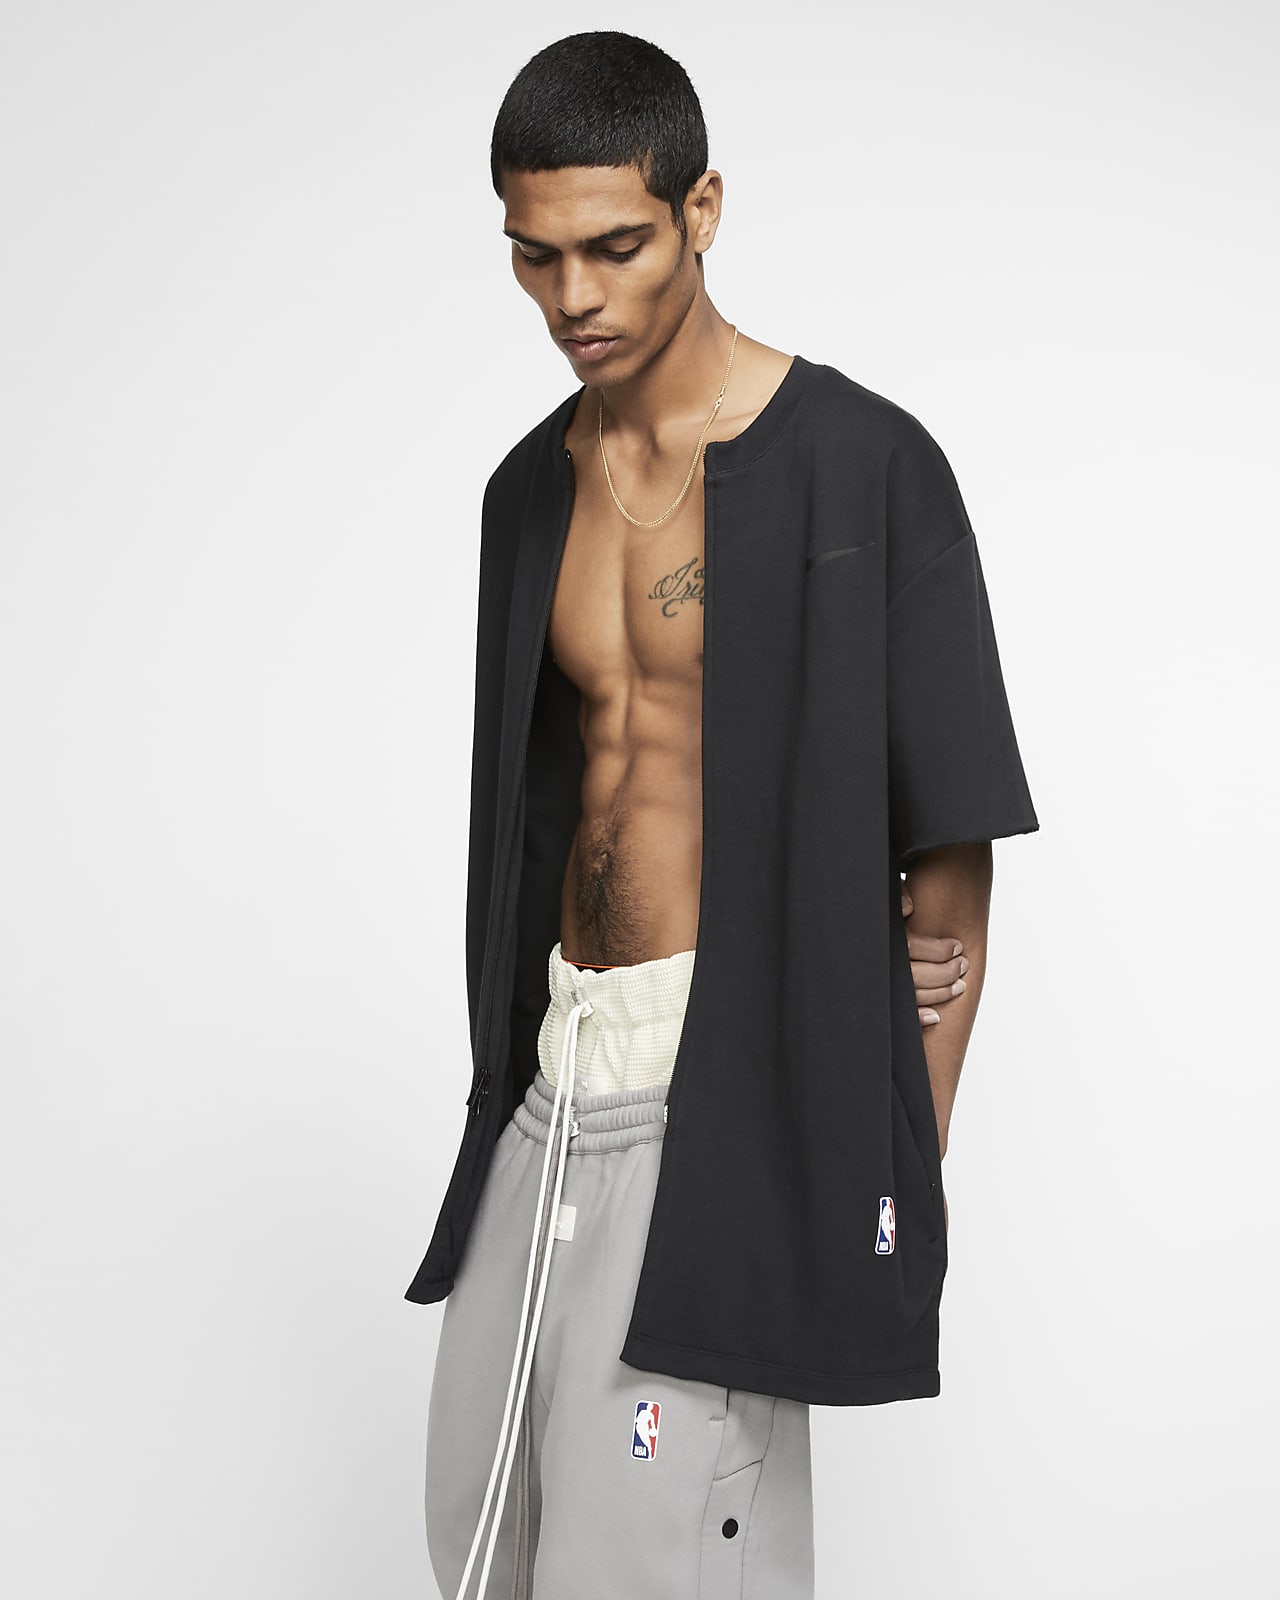 Nike x Fear of God Men's Warm-Up Top 